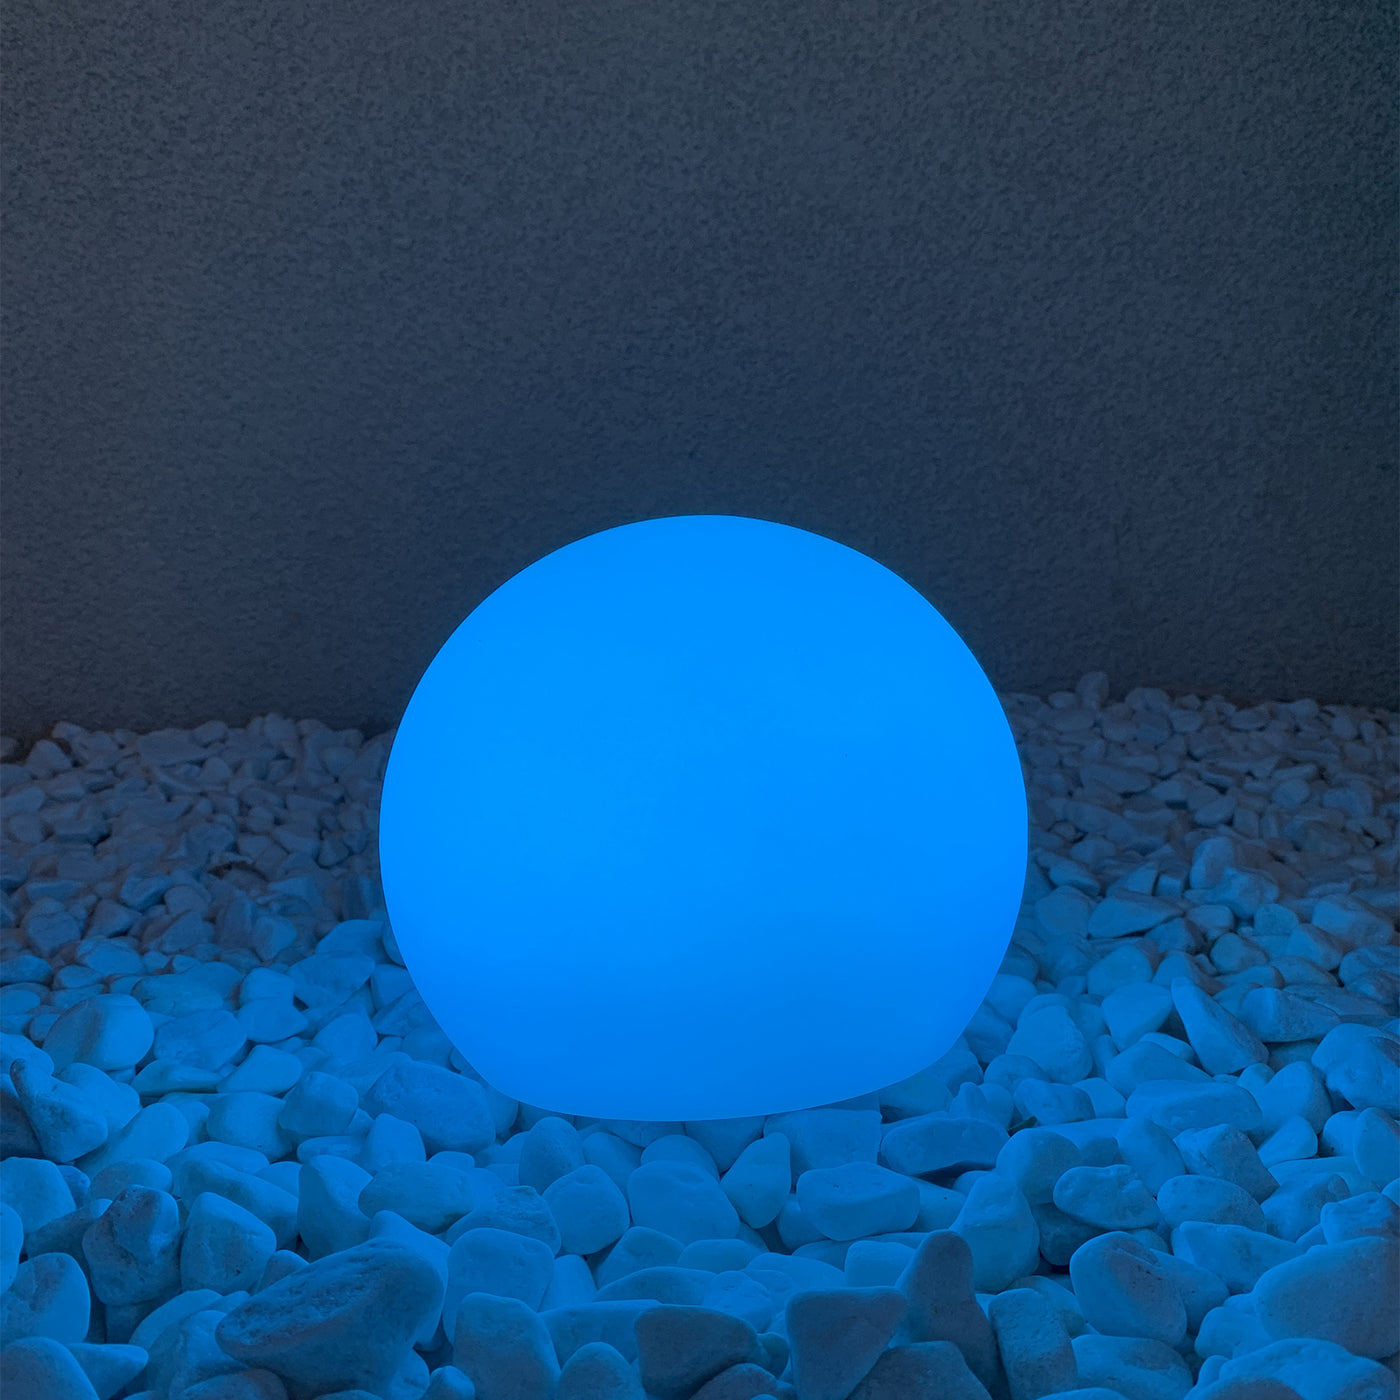 Boule lumineuse solaire solsty c30